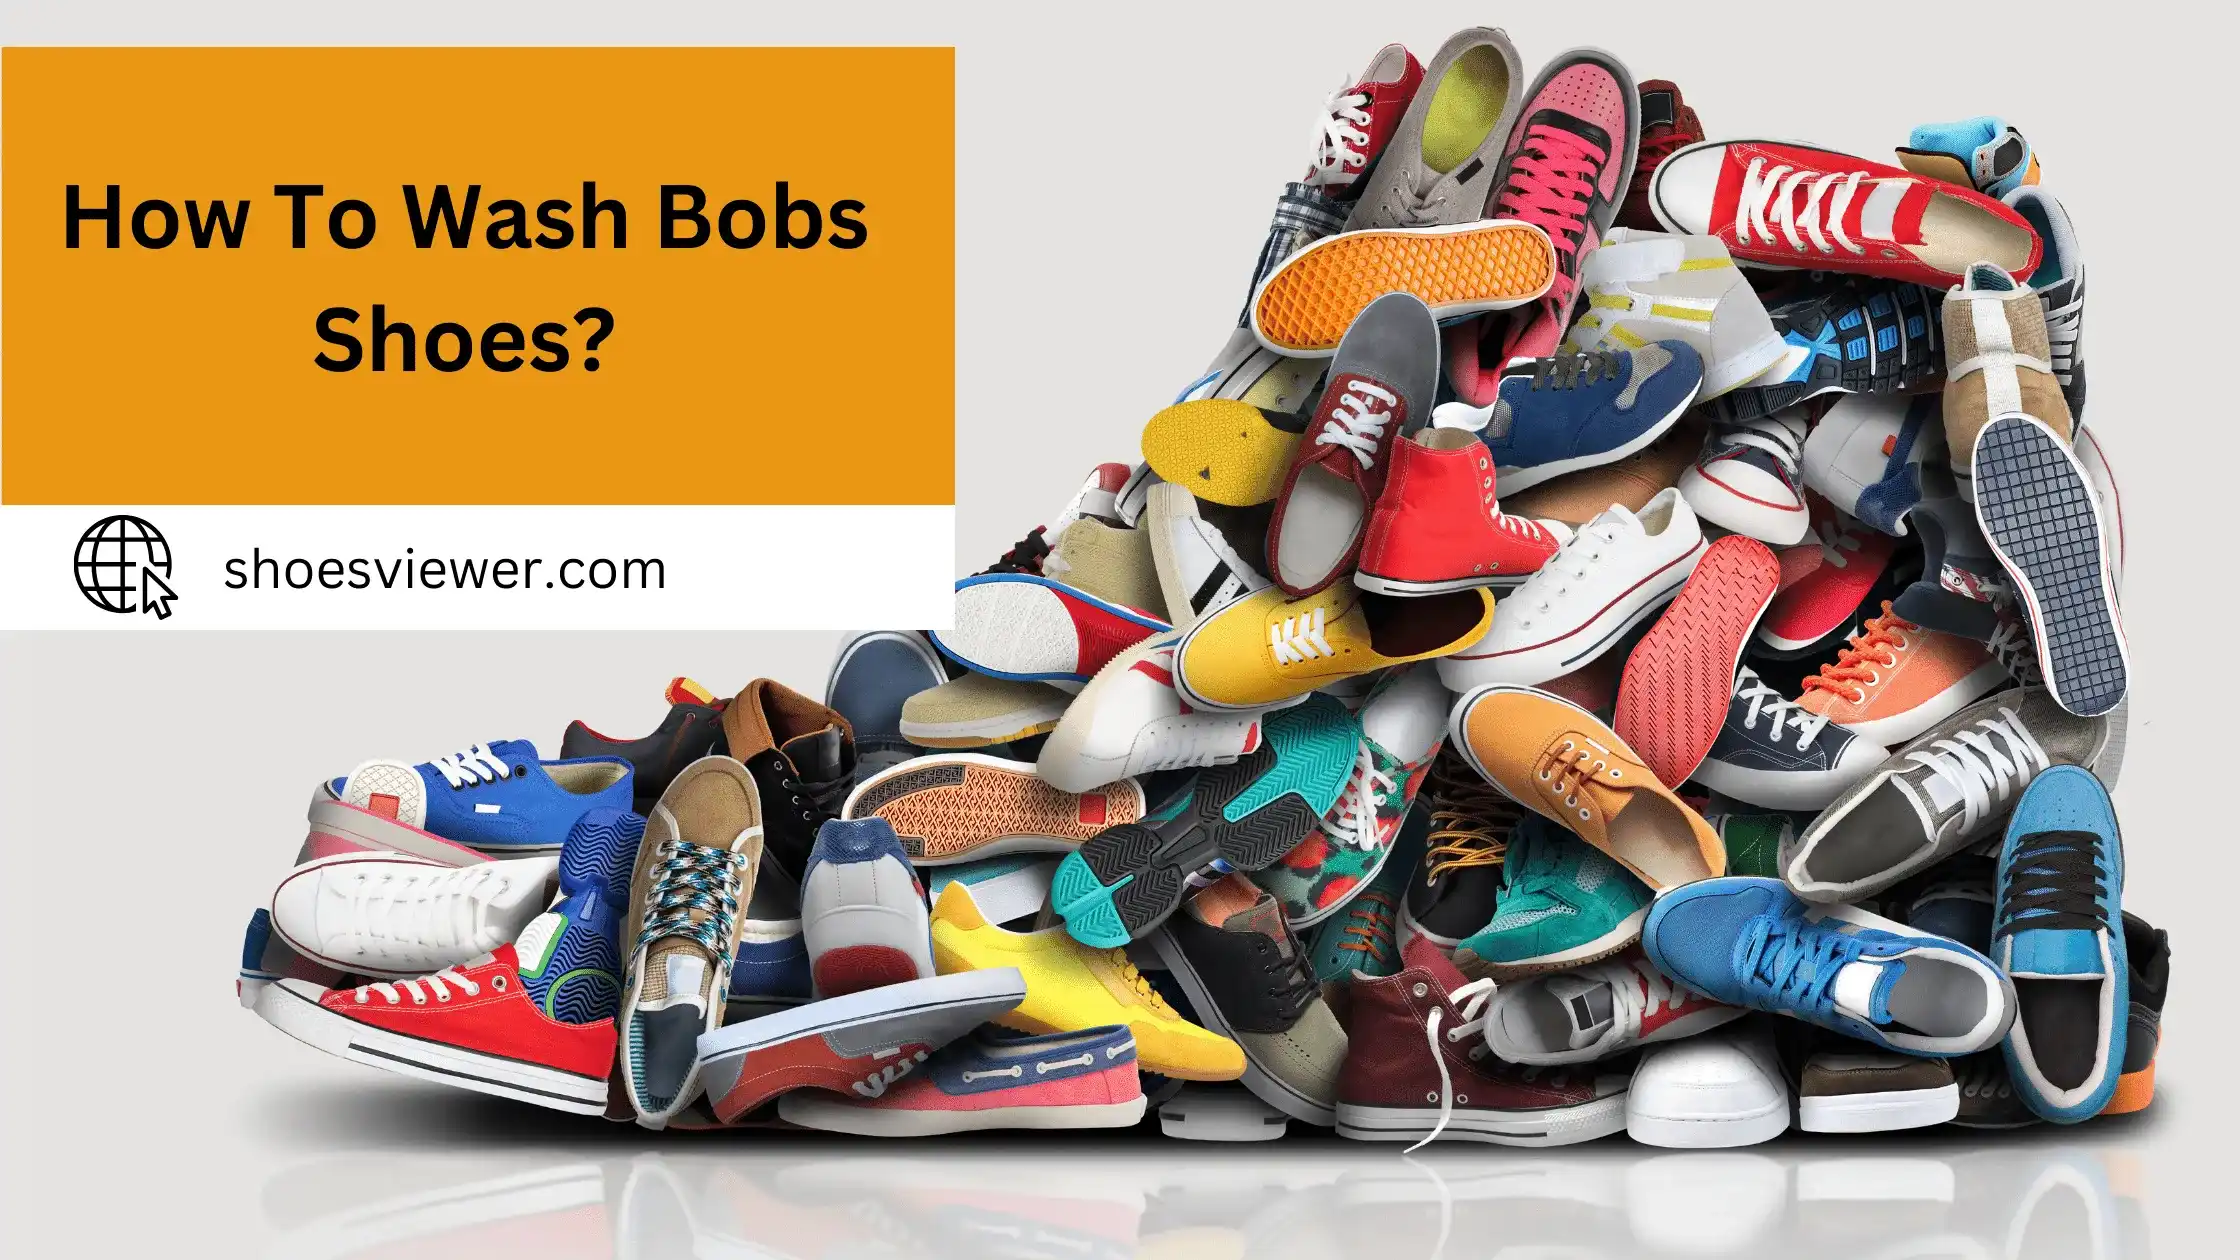 How To Wash Bobs Shoes? Effective And Easiest Guide